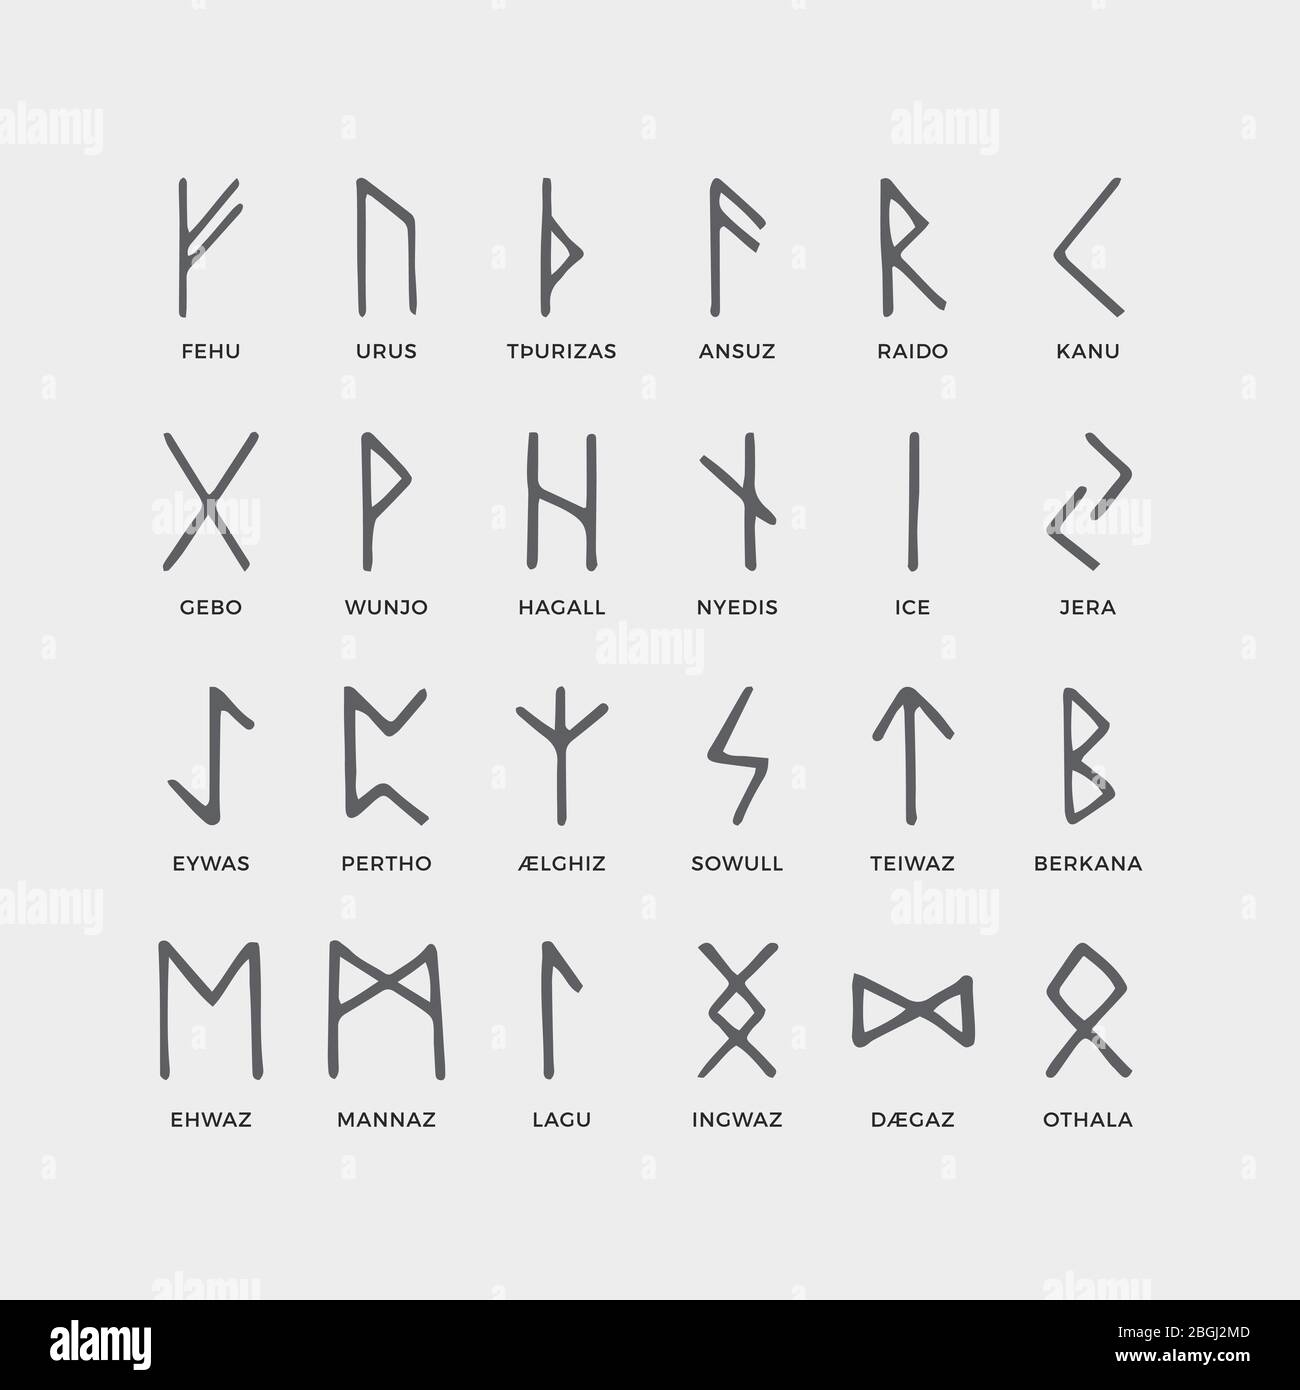 Hieroglyphics Alphabet High Resolution Stock Photography And Images Alamy